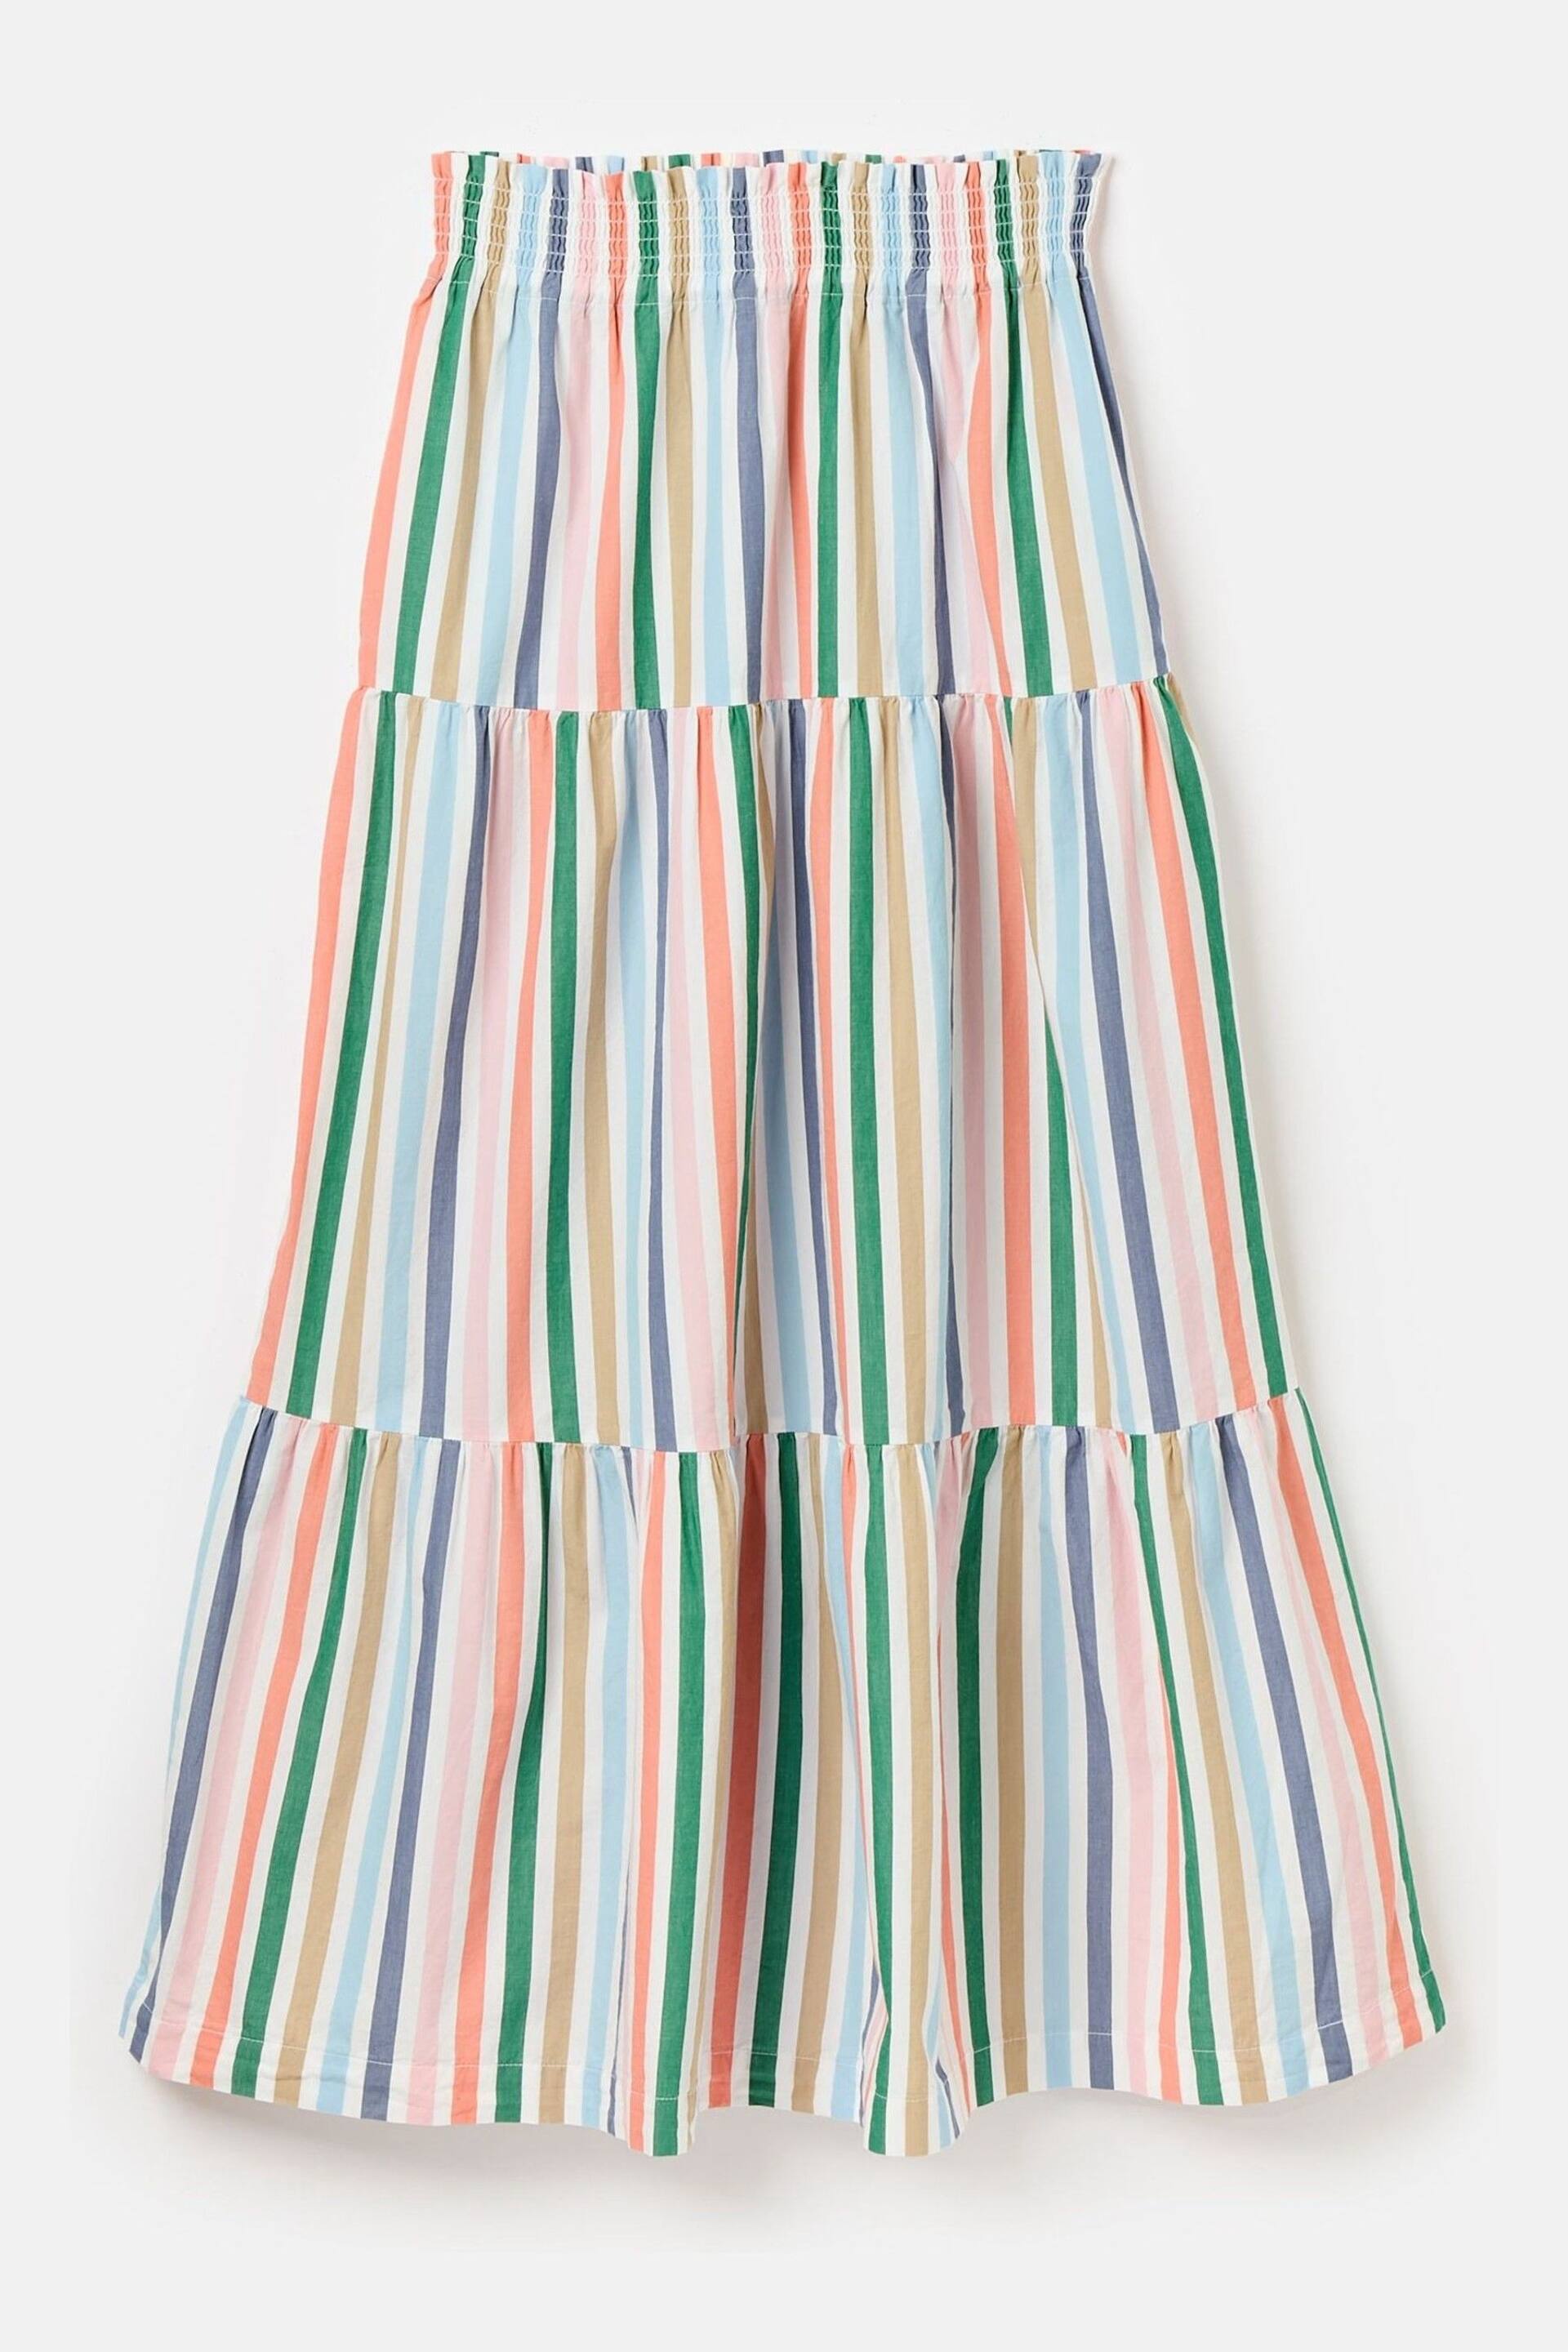 Joules Cynthia Stripe Tiered Co-ord Skirt - Image 8 of 8